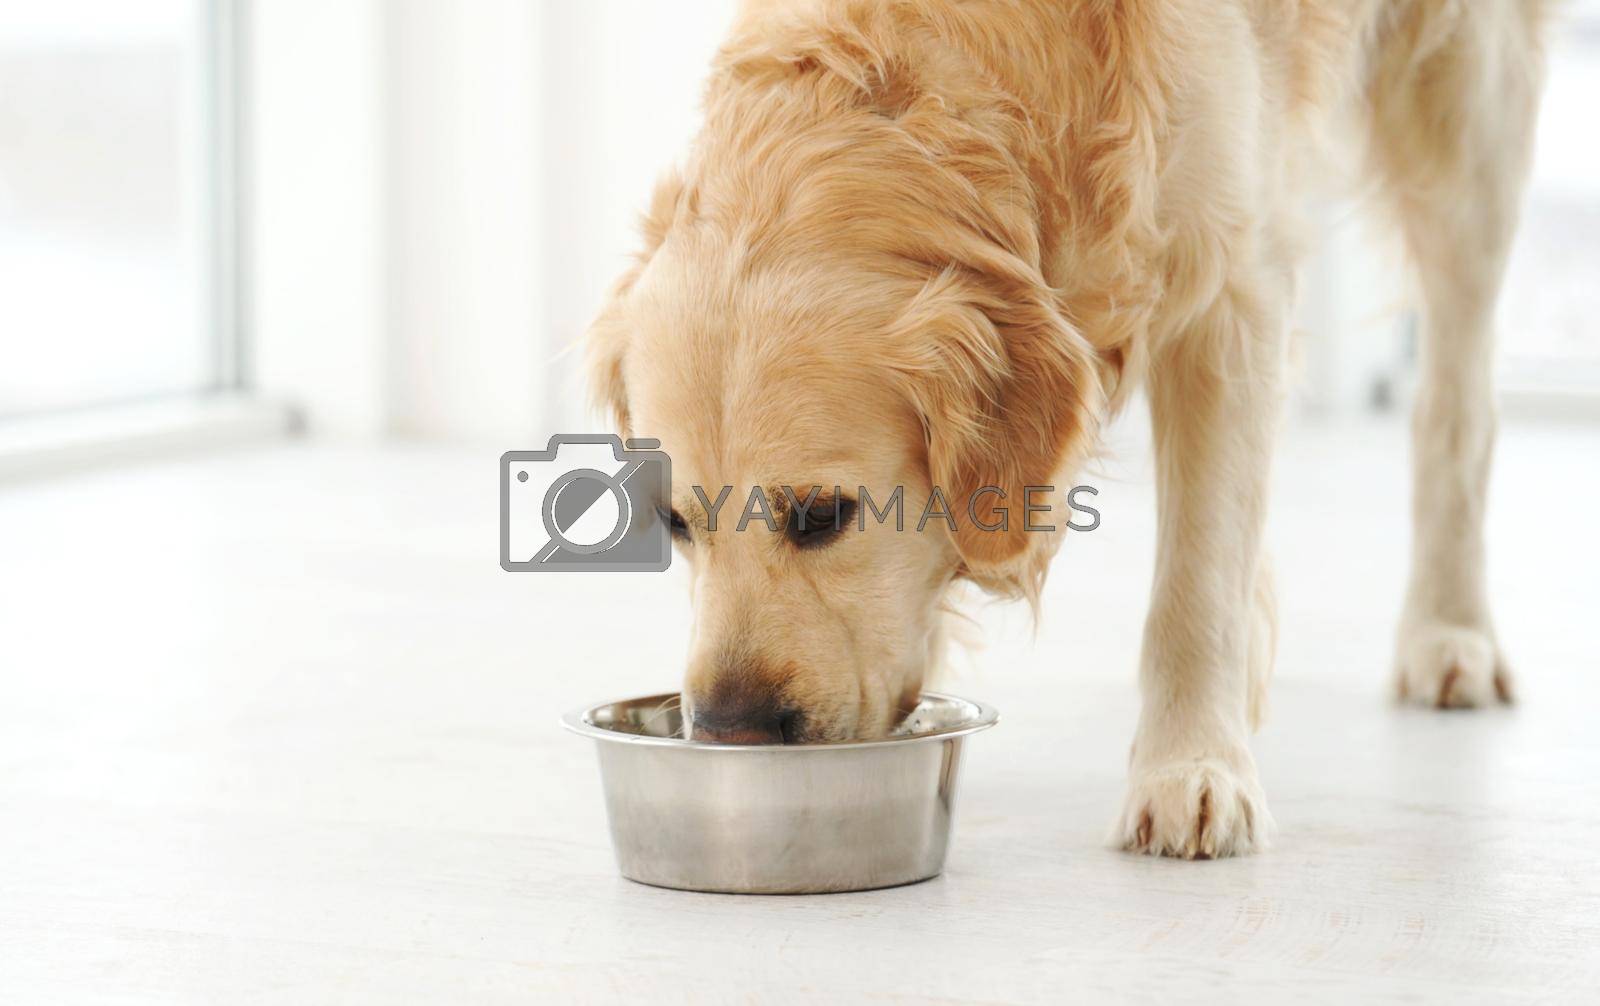 Royalty free image of Golden retriever dog and food by GekaSkr